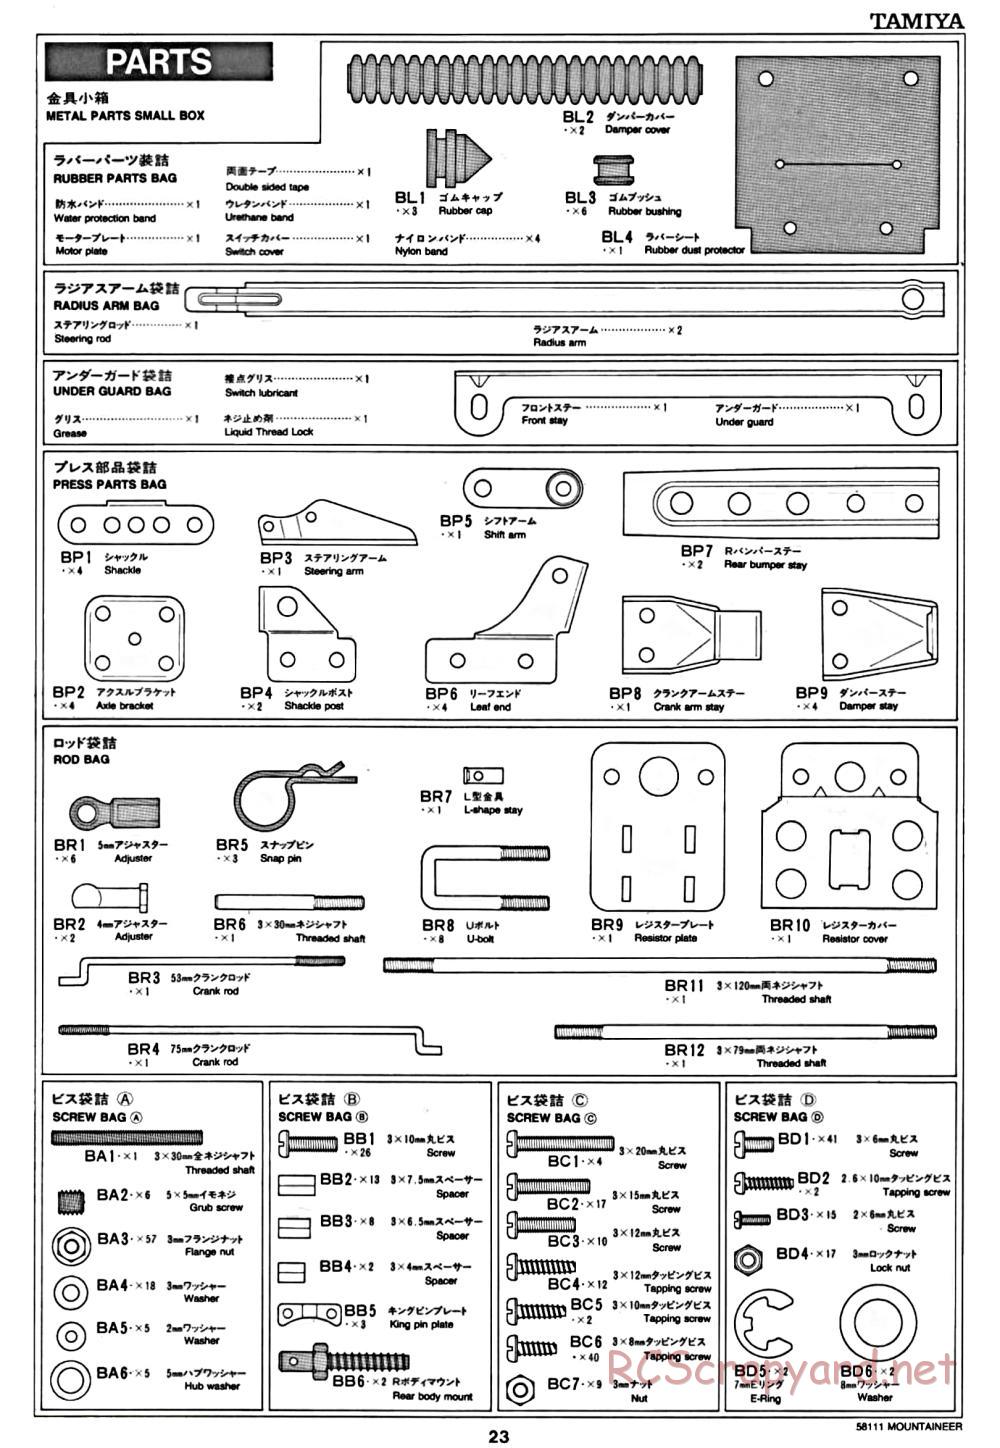 Tamiya - Toyota 4x4 Pick Up Mountaineer Chassis - Manual - Page 23